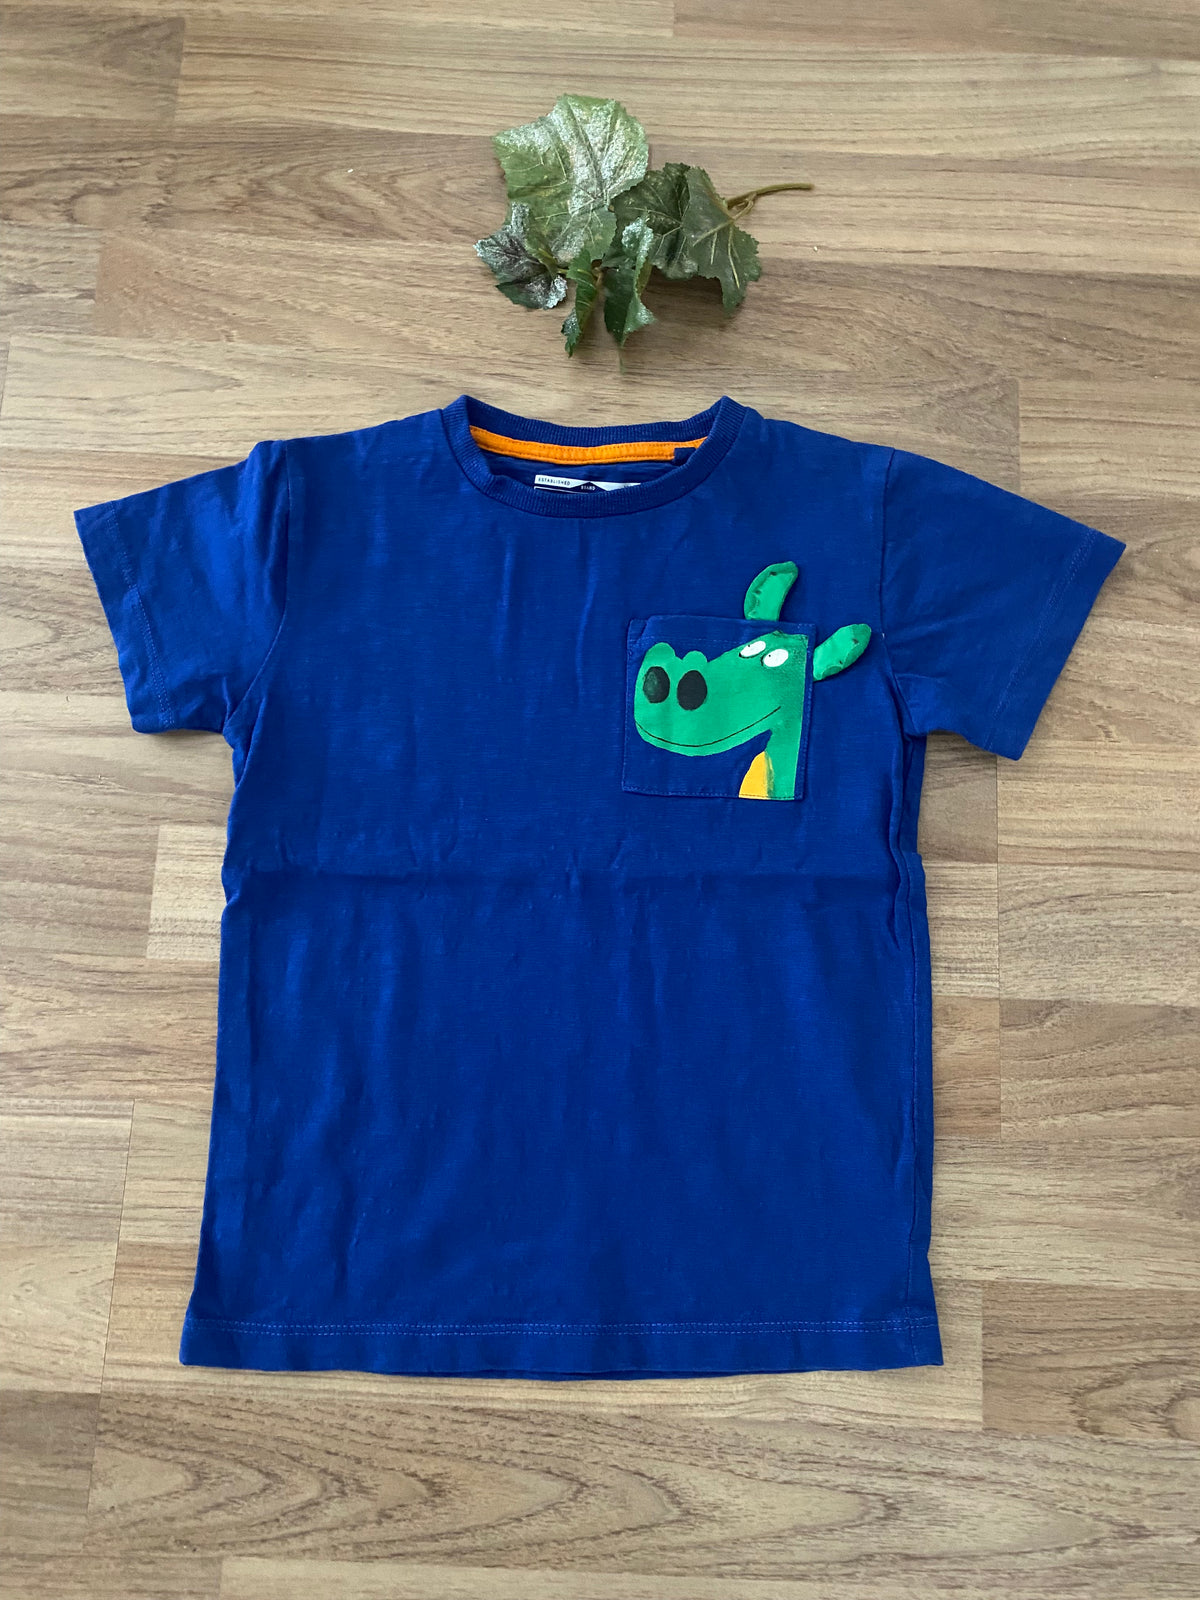 Short Sleeve Graphic Top (Boys Size 5-6)